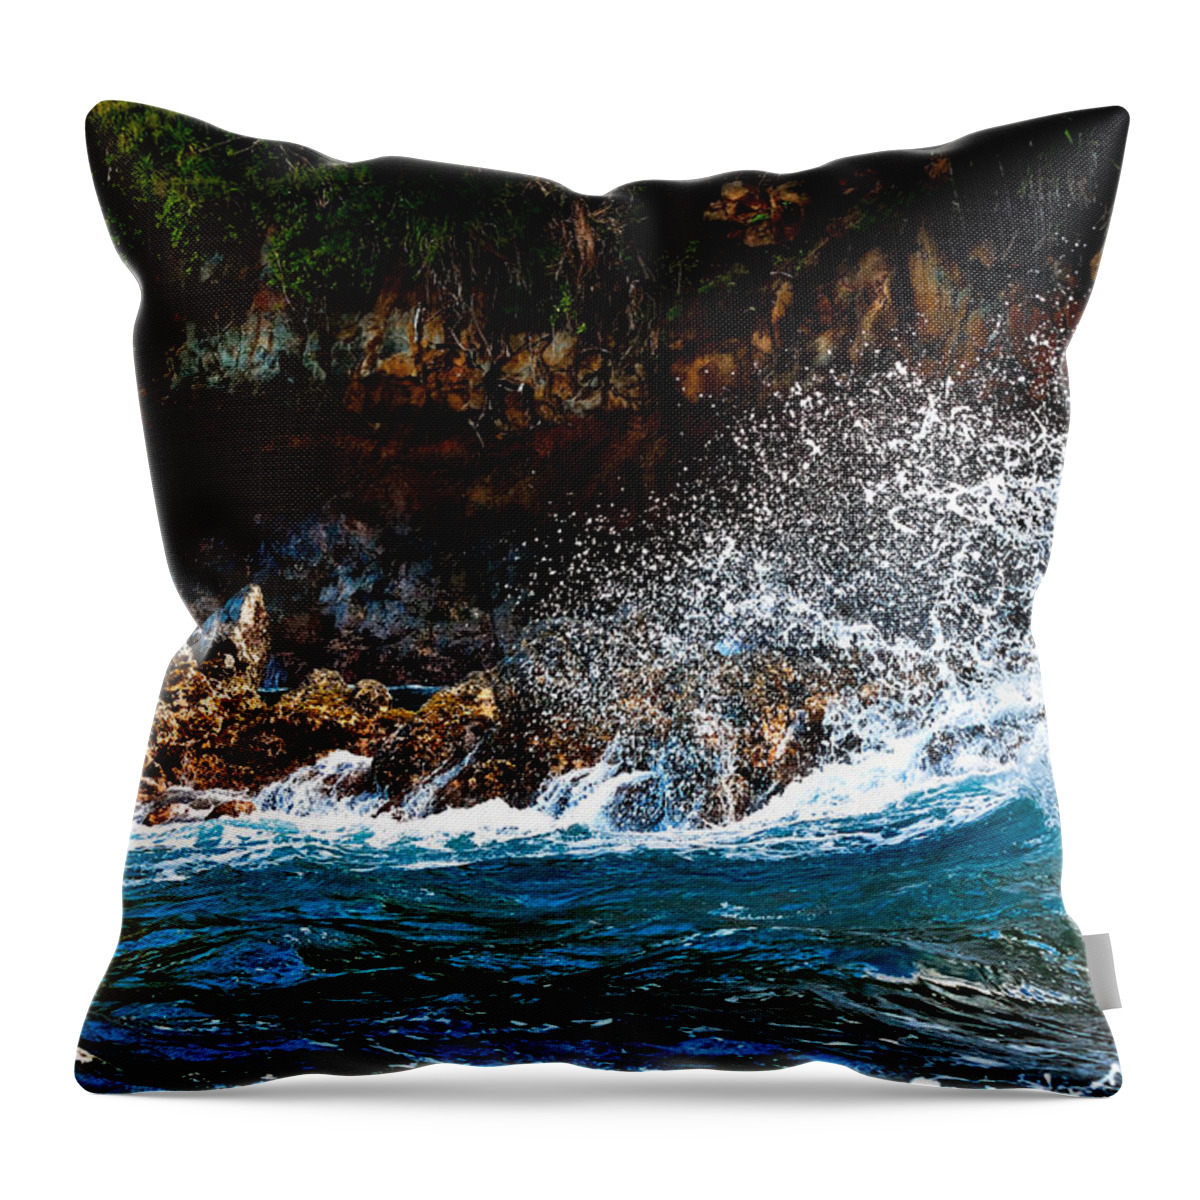 Rocks Throw Pillow featuring the photograph Clashing Nature by Christopher Holmes